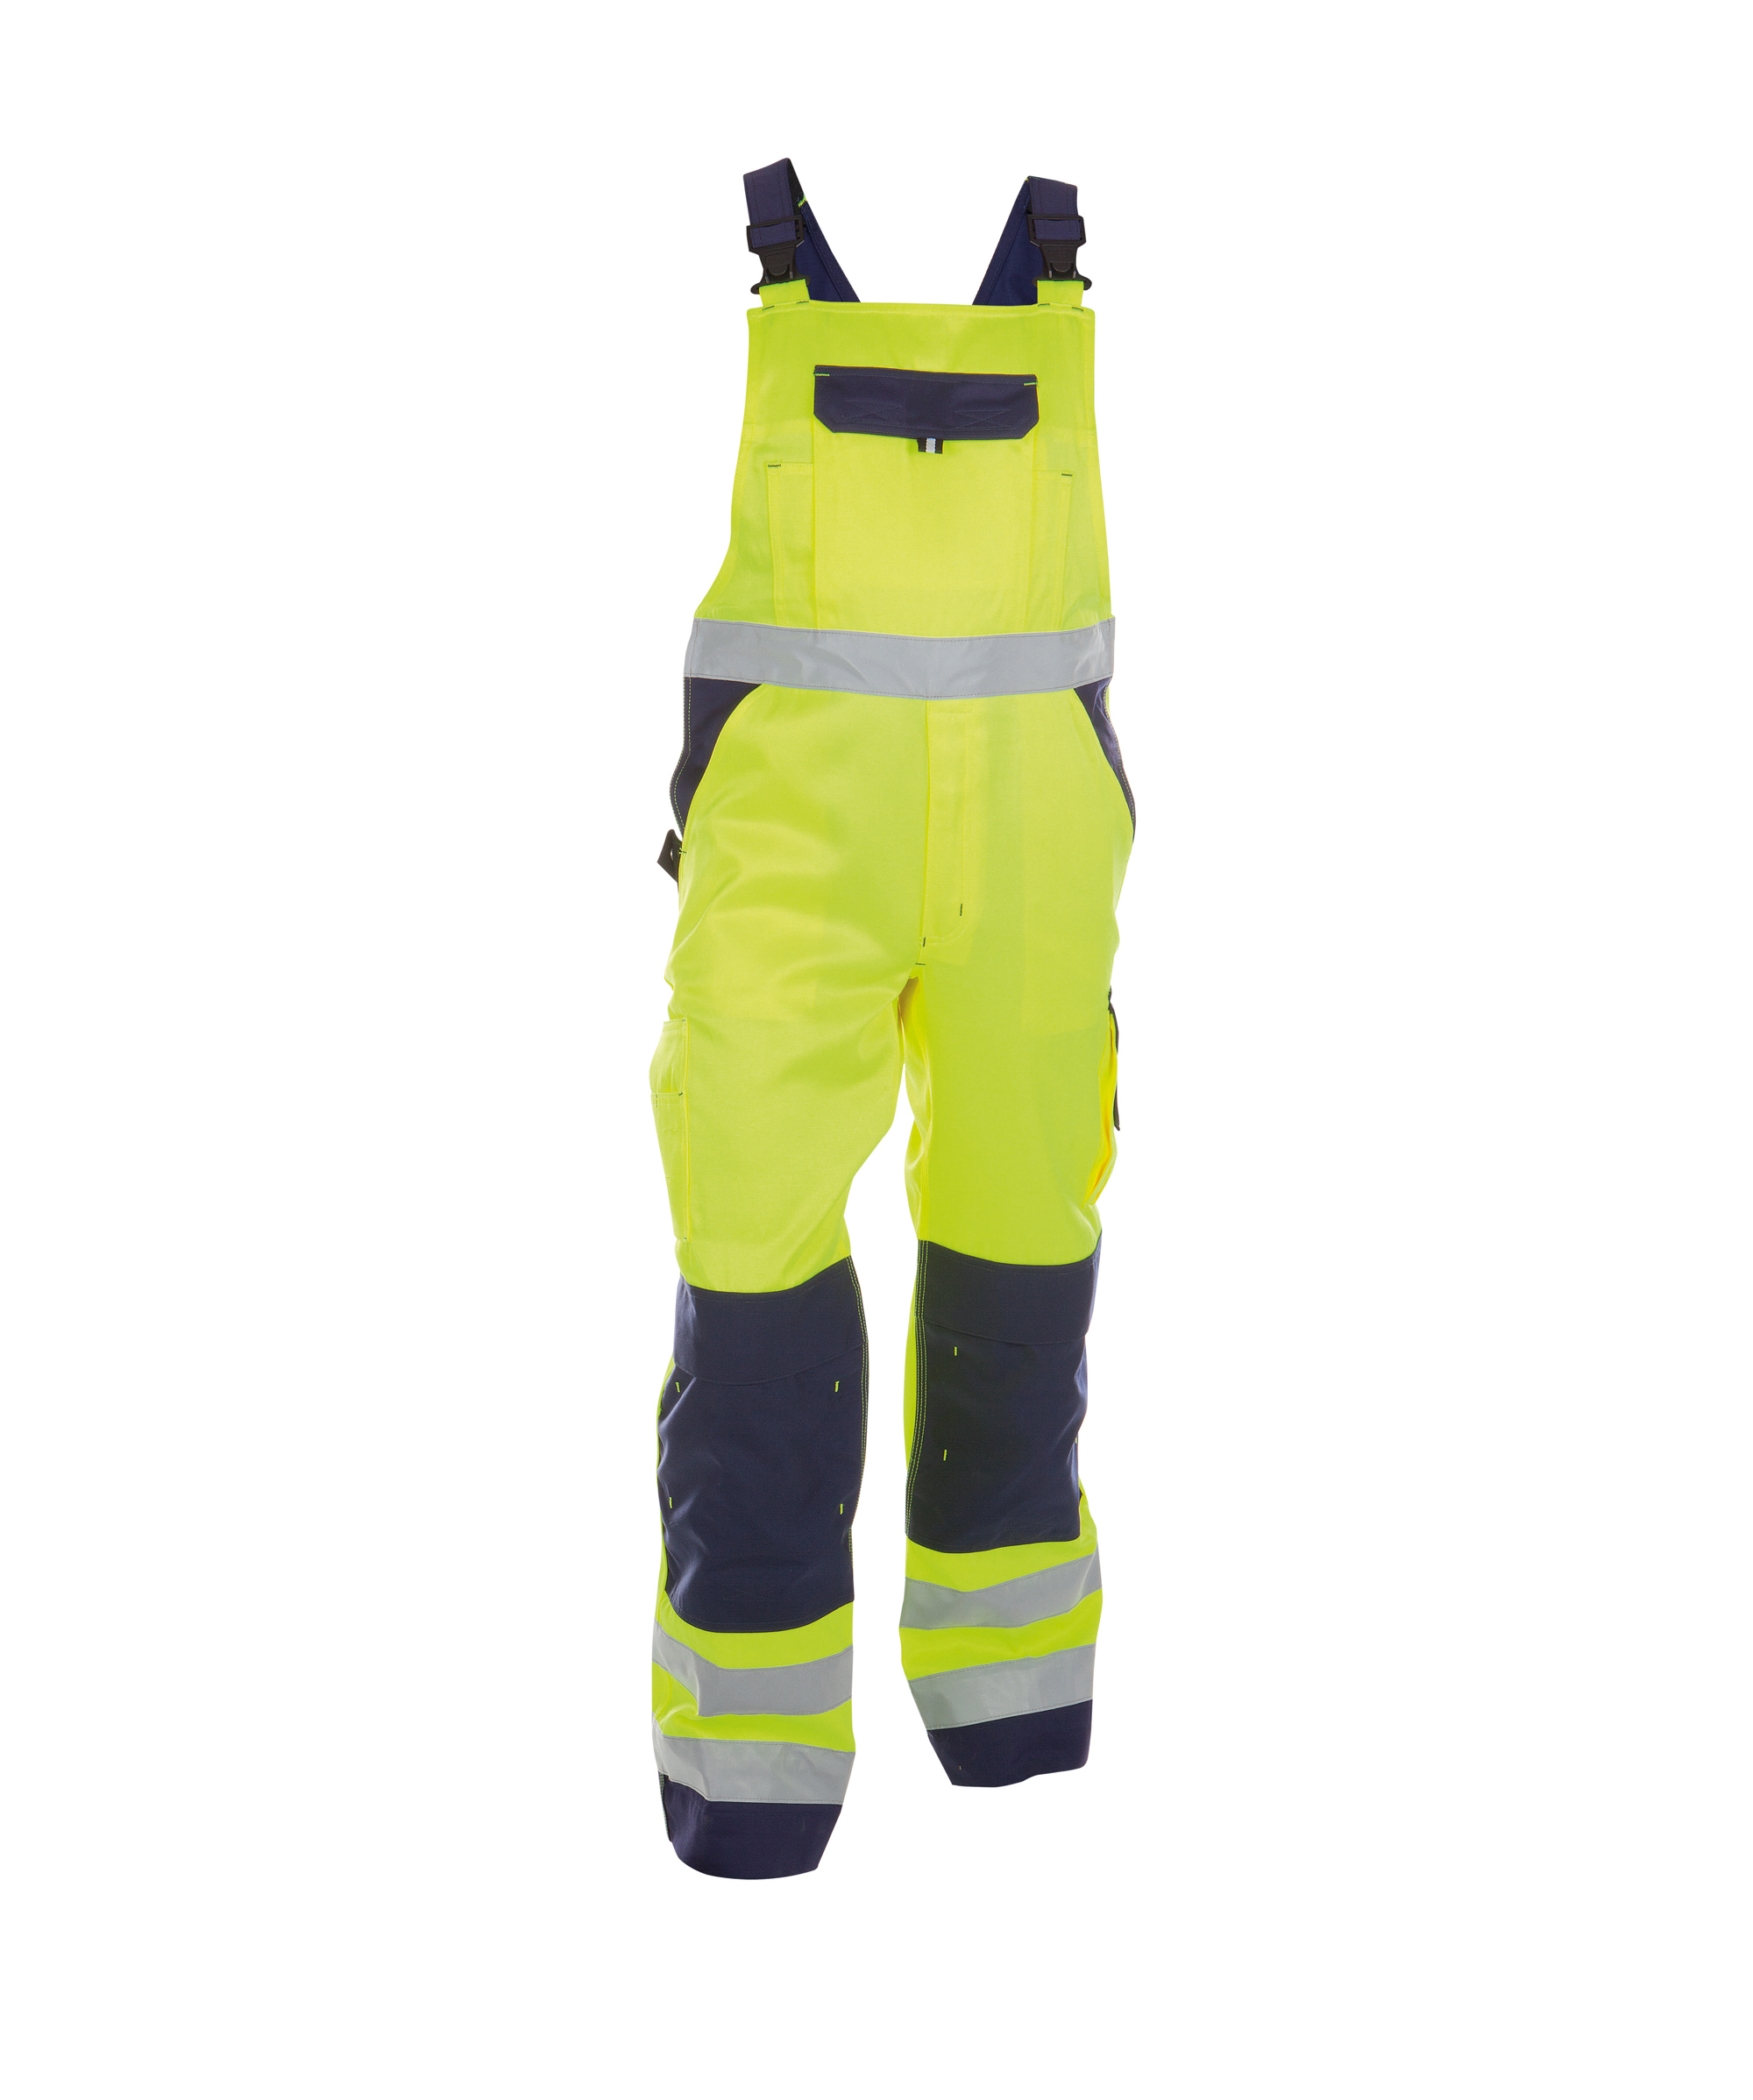 toulouse_high-visibility-brace-overall-with-knee-pockets_fluo-yellow-navy_front.jpg